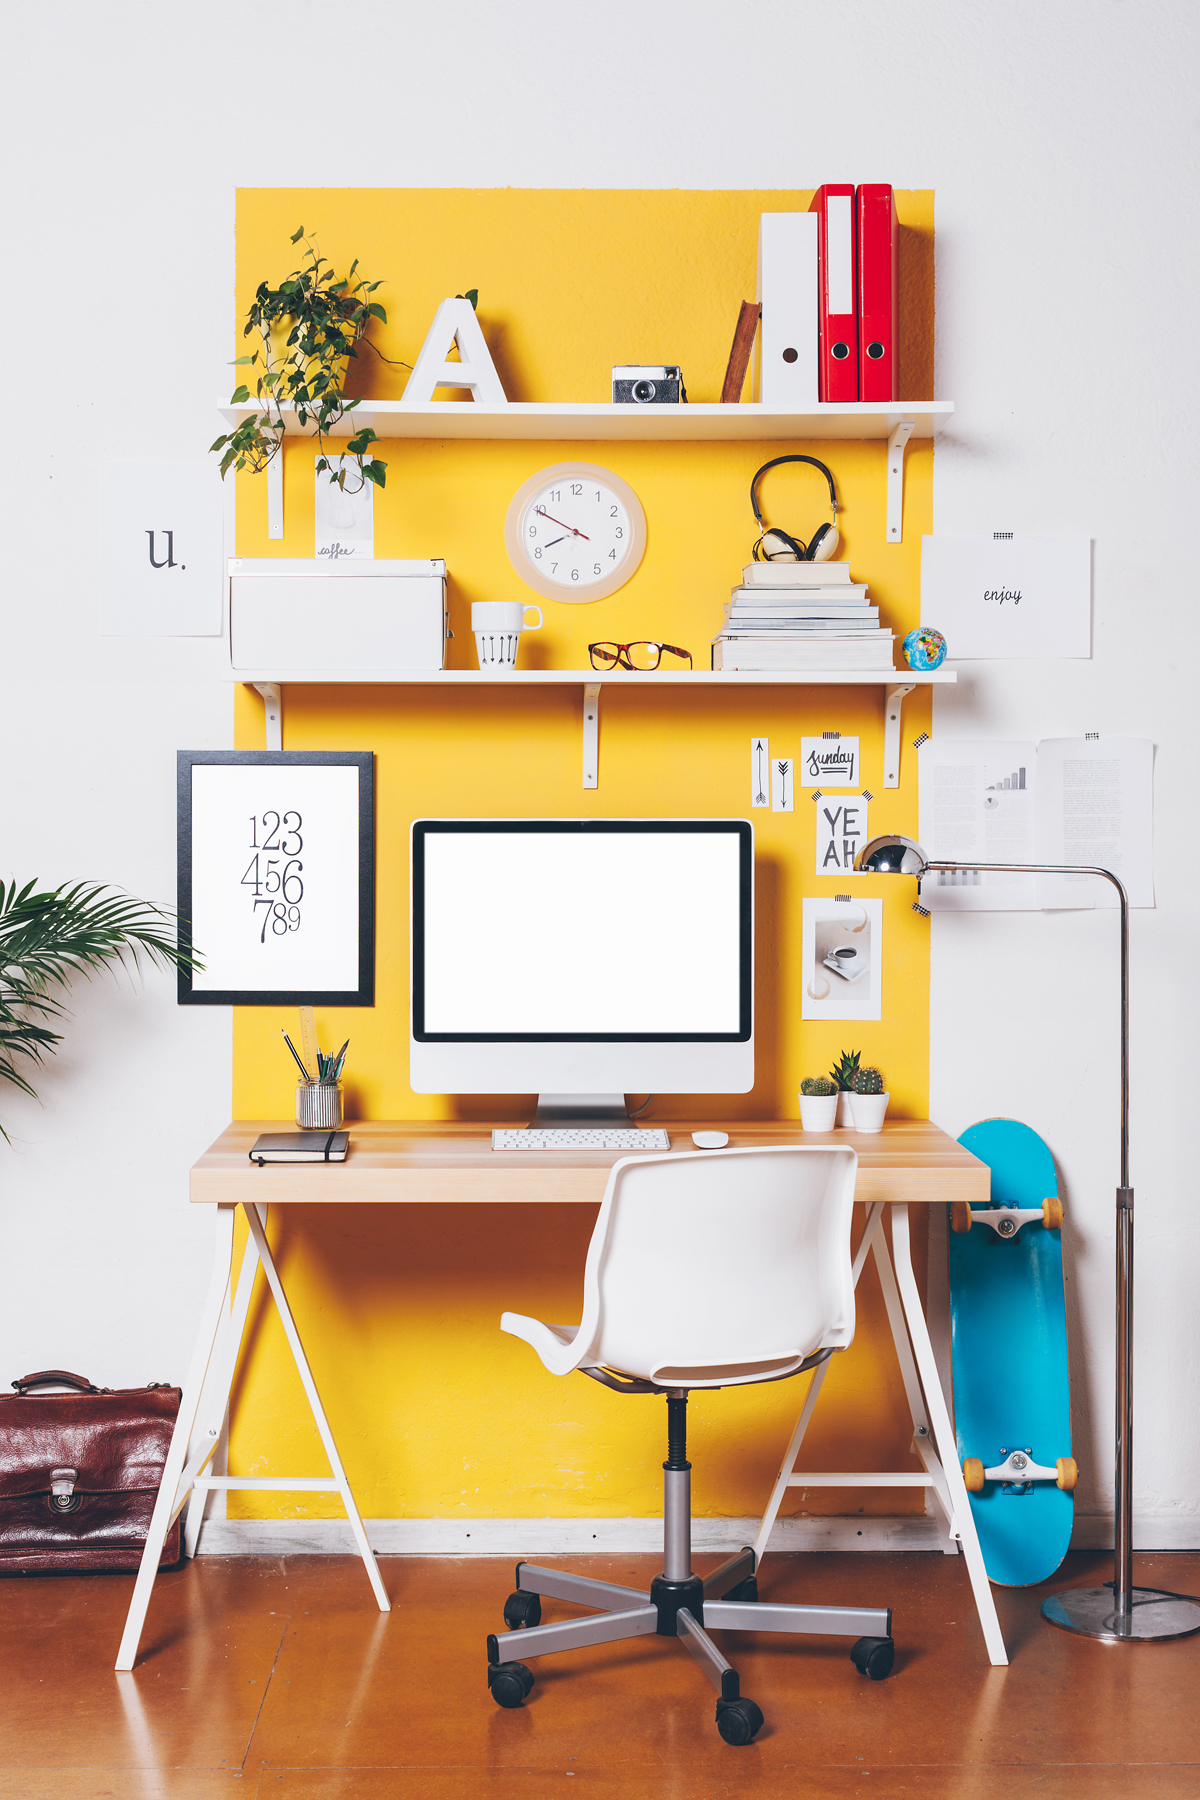 A happy mind is an organized mind, and a happy office space is too